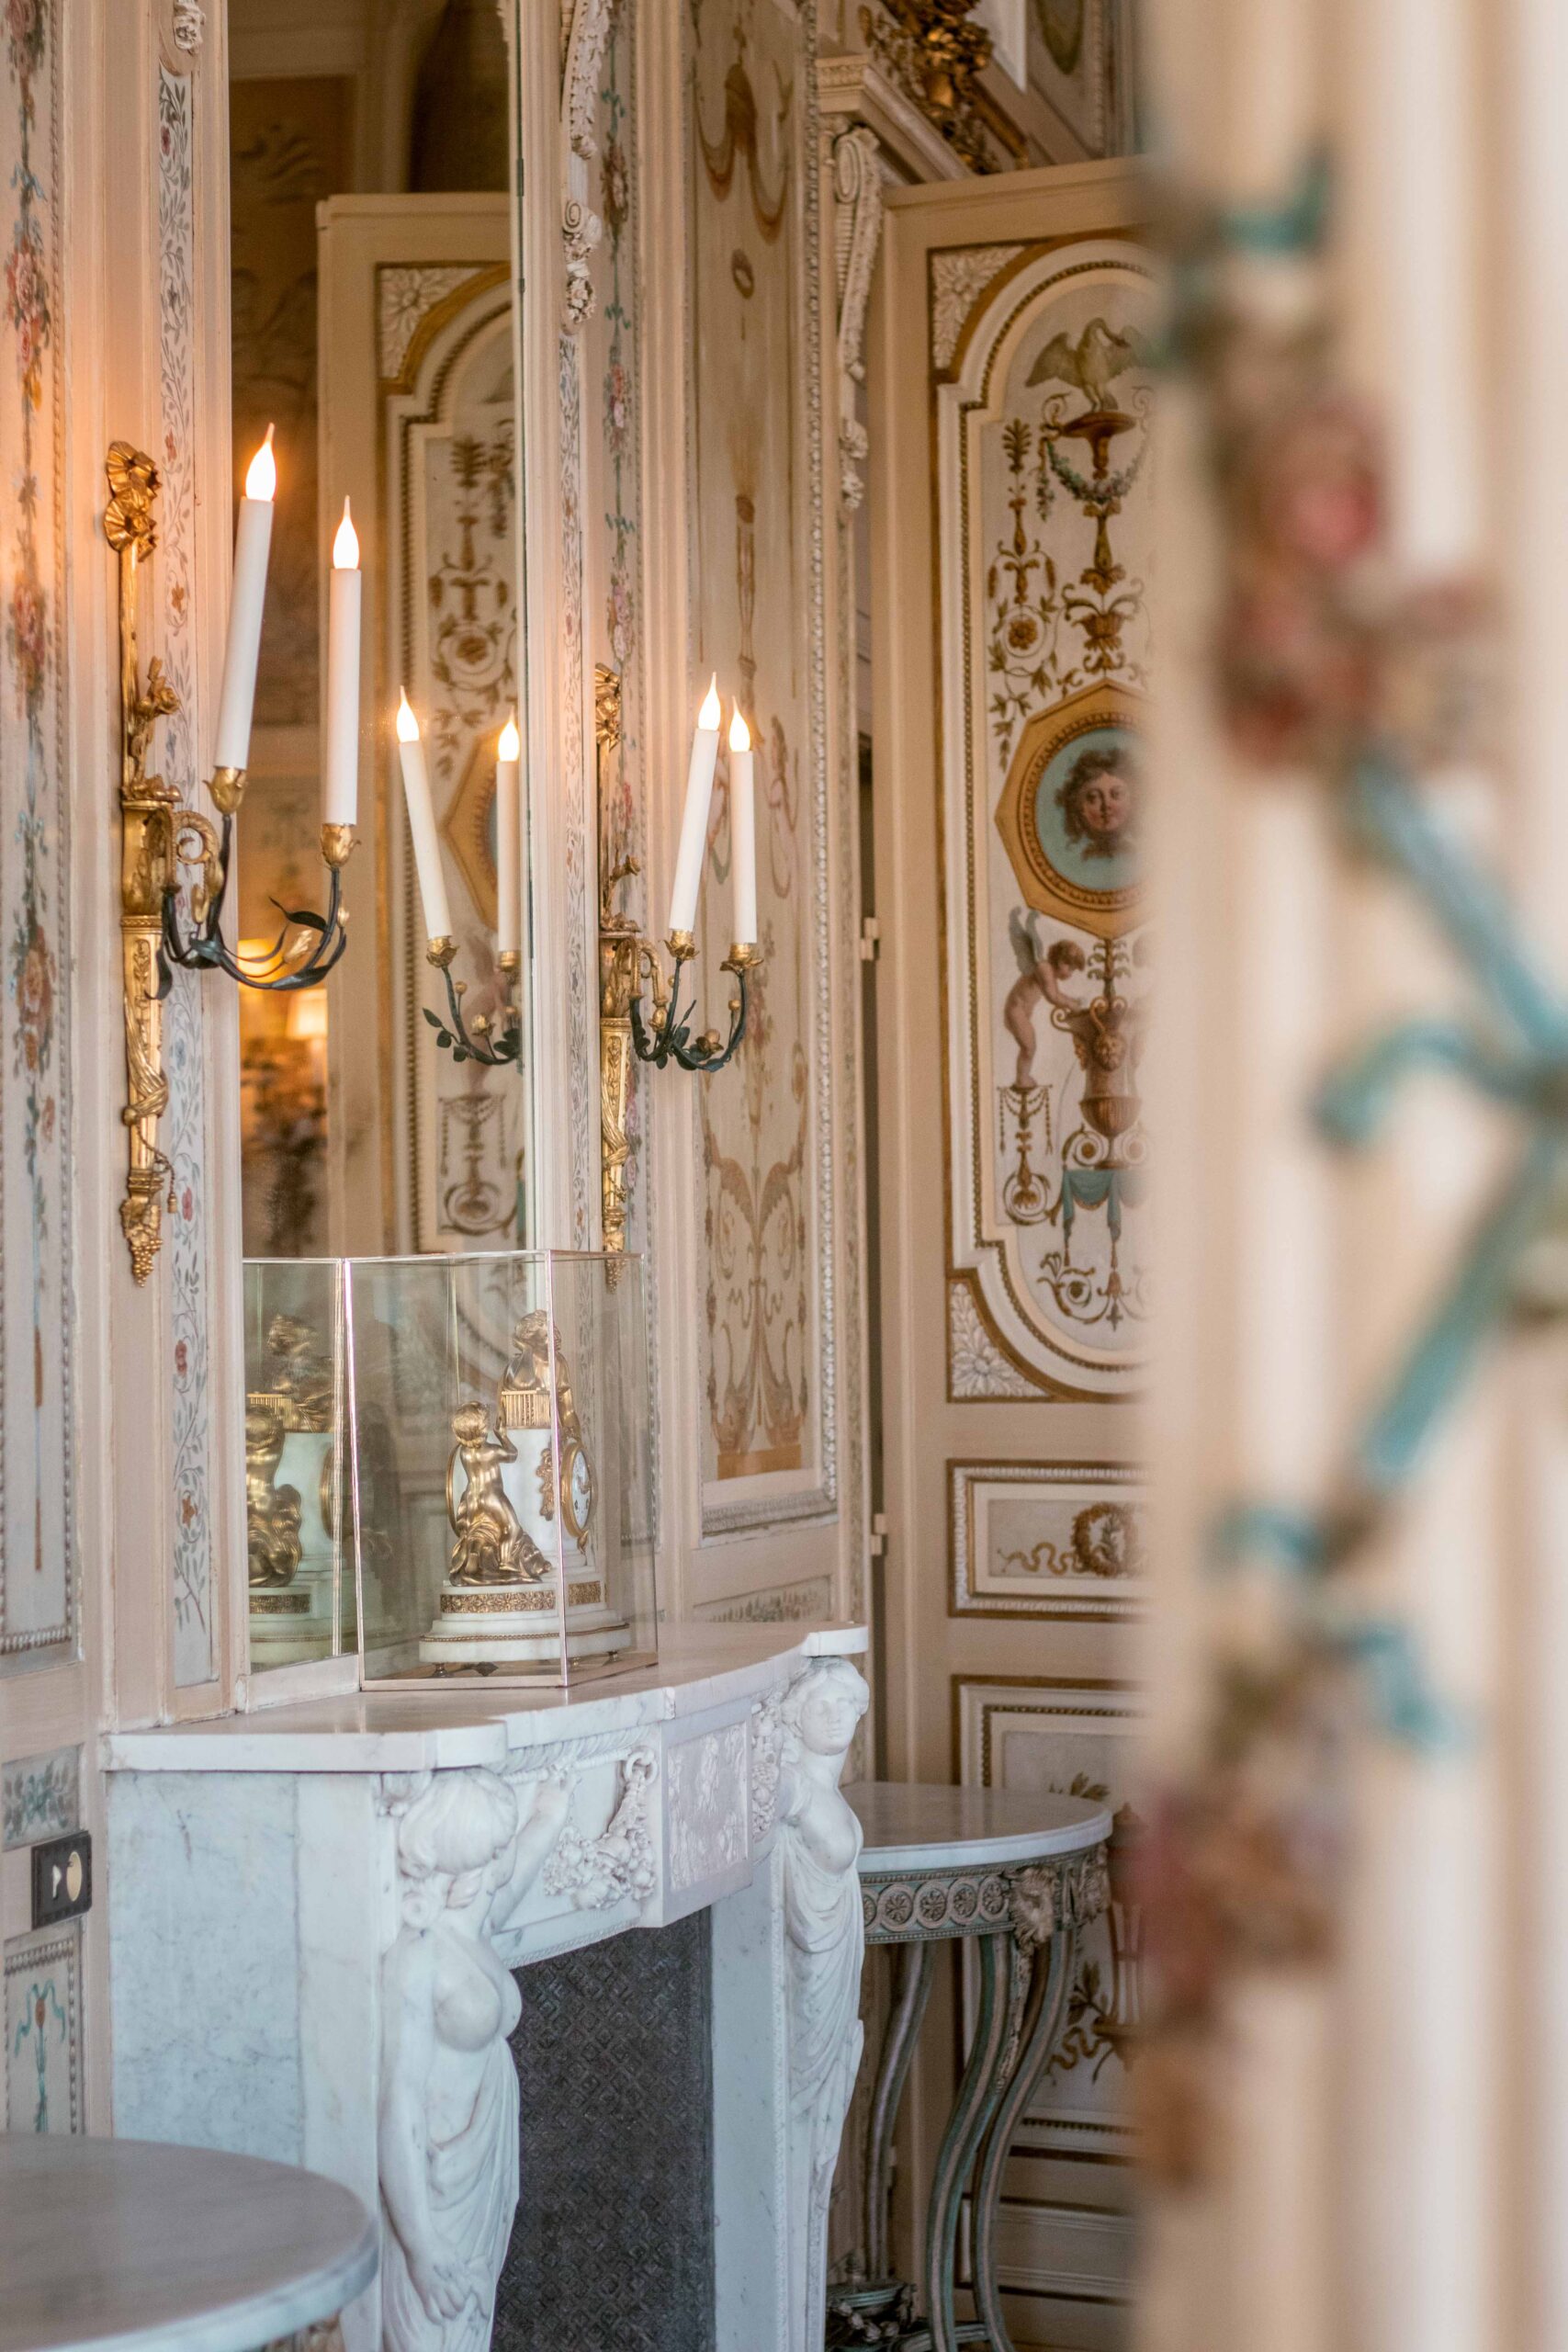 Details (clock, candlesticks, mirror) over an indoor chimney and baroque-style tapestry of the Villa Ephrussi de Rothschild in Saint-Jean-Cap-Ferrat, France